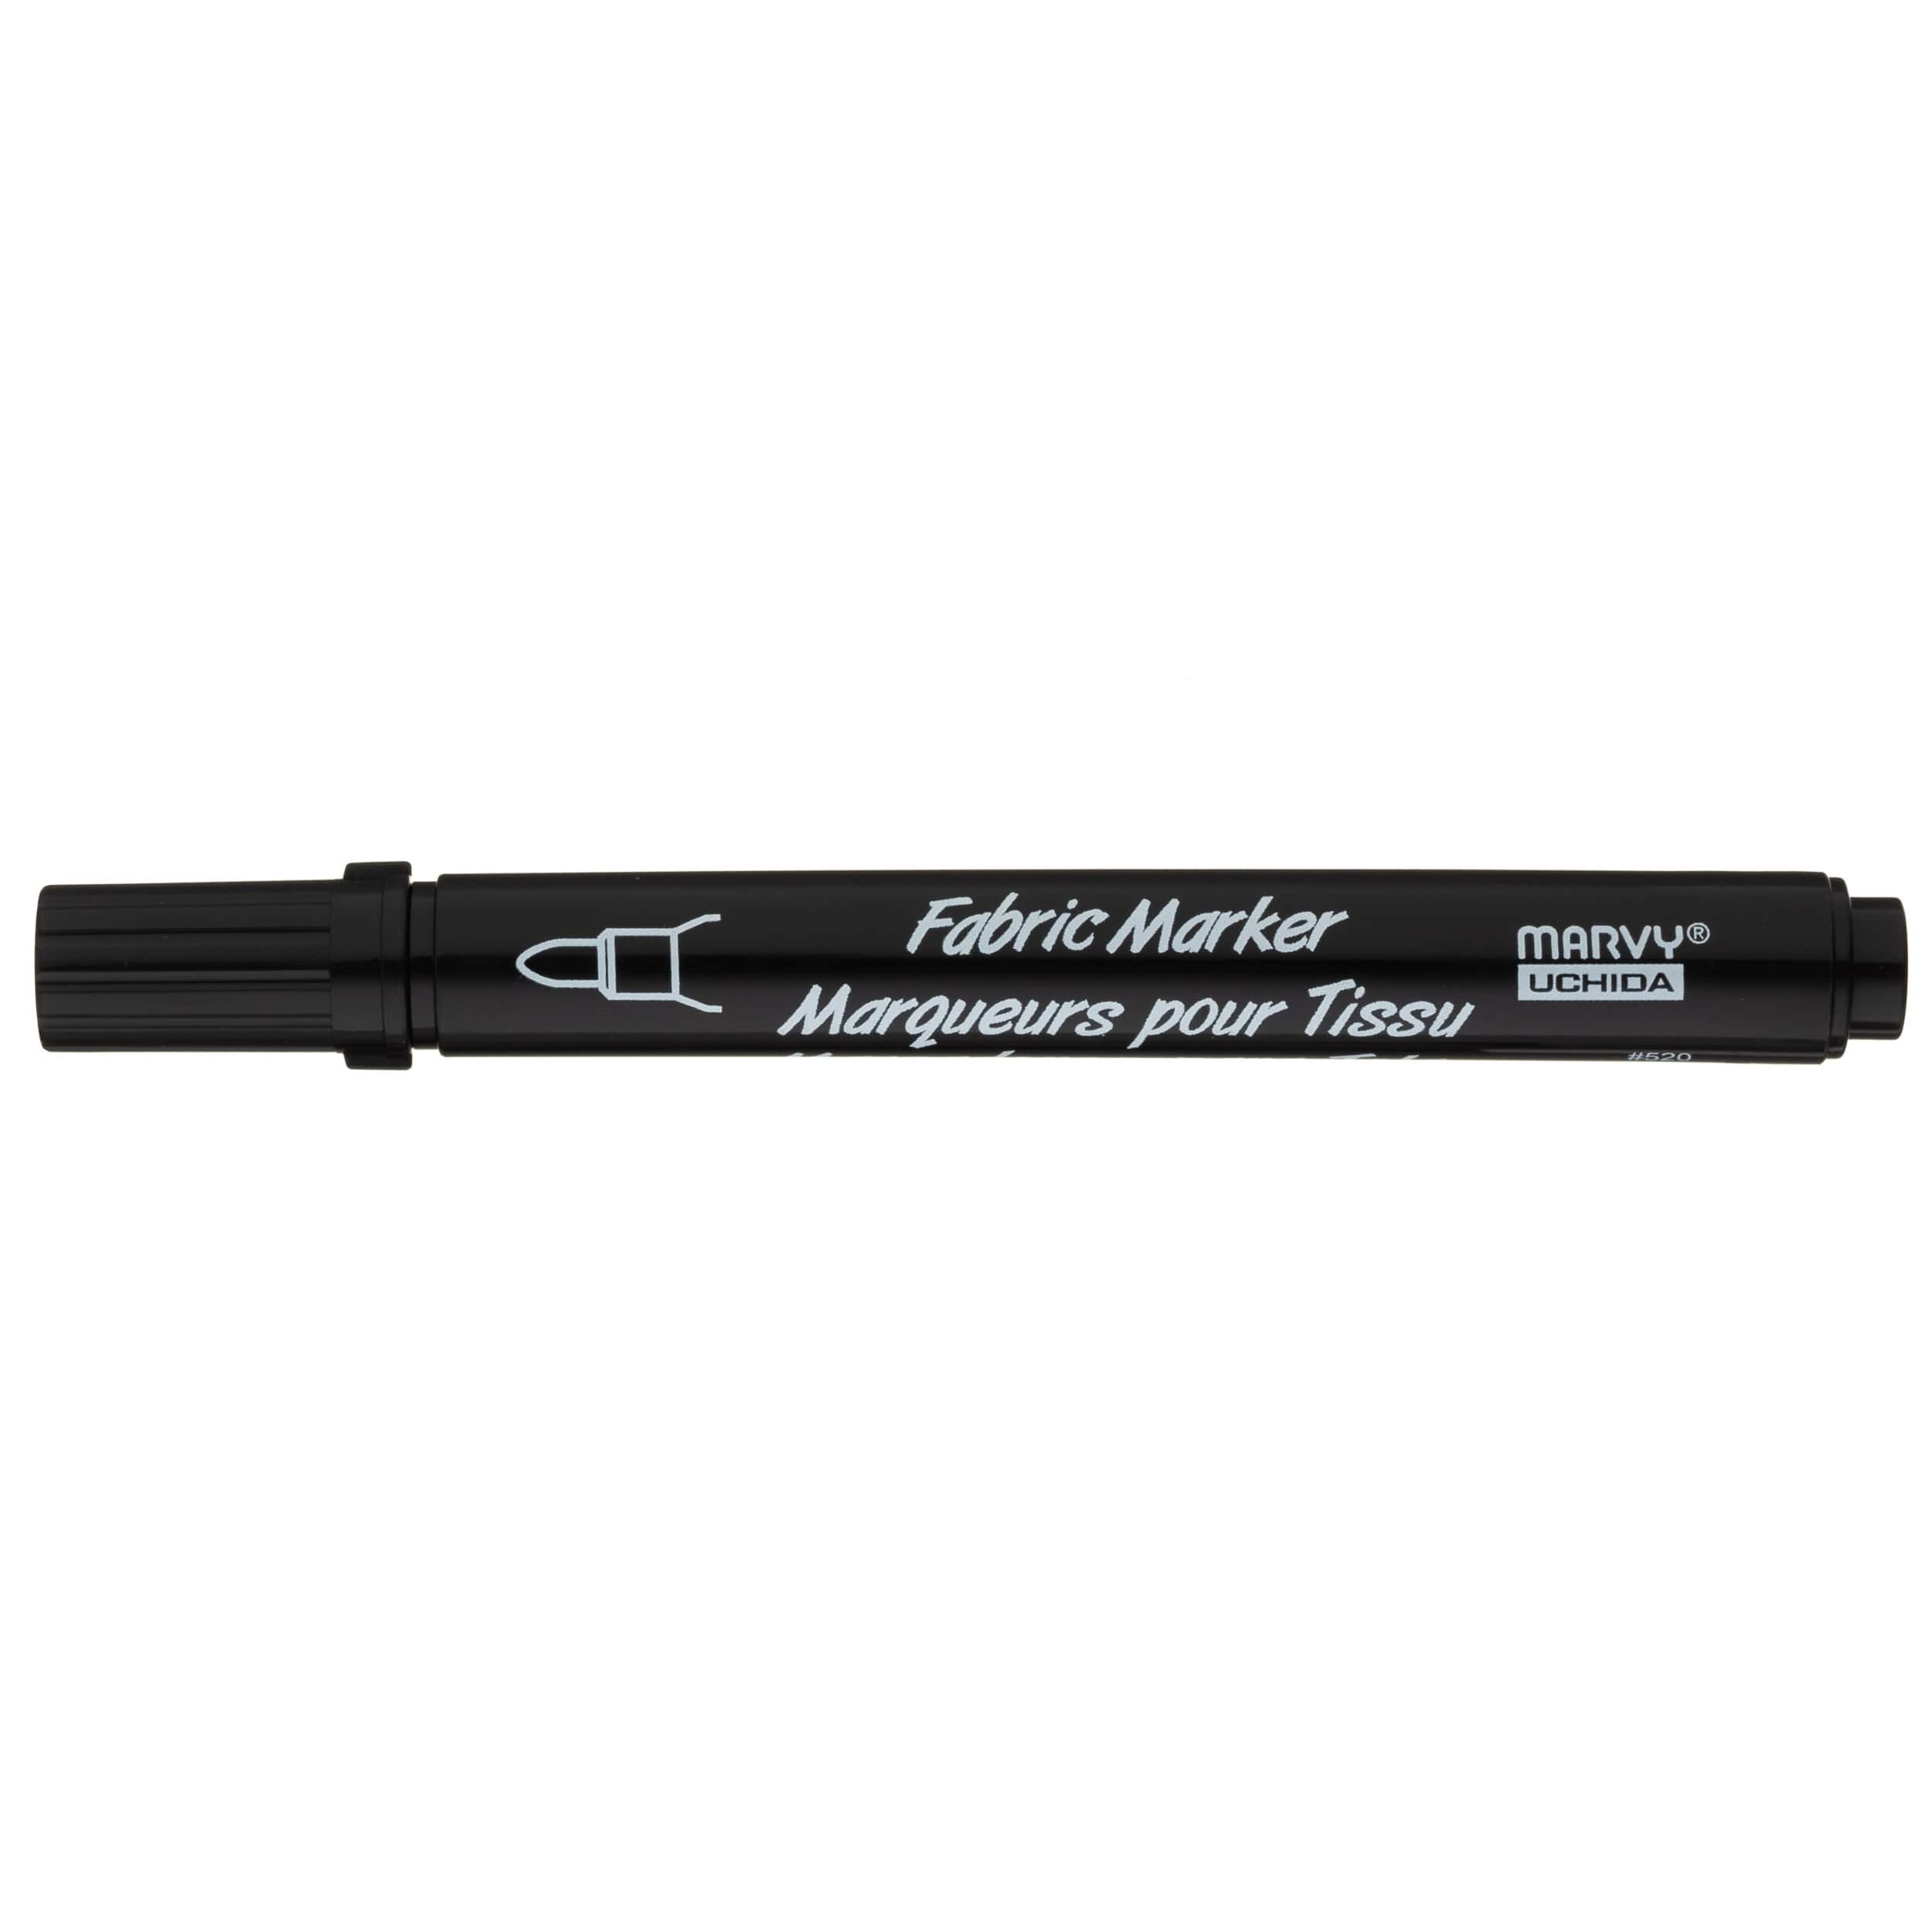 3 x WATERPROOF Fabric marker pen Black Permanent Laundry BUY TWO GET ONE FREE 